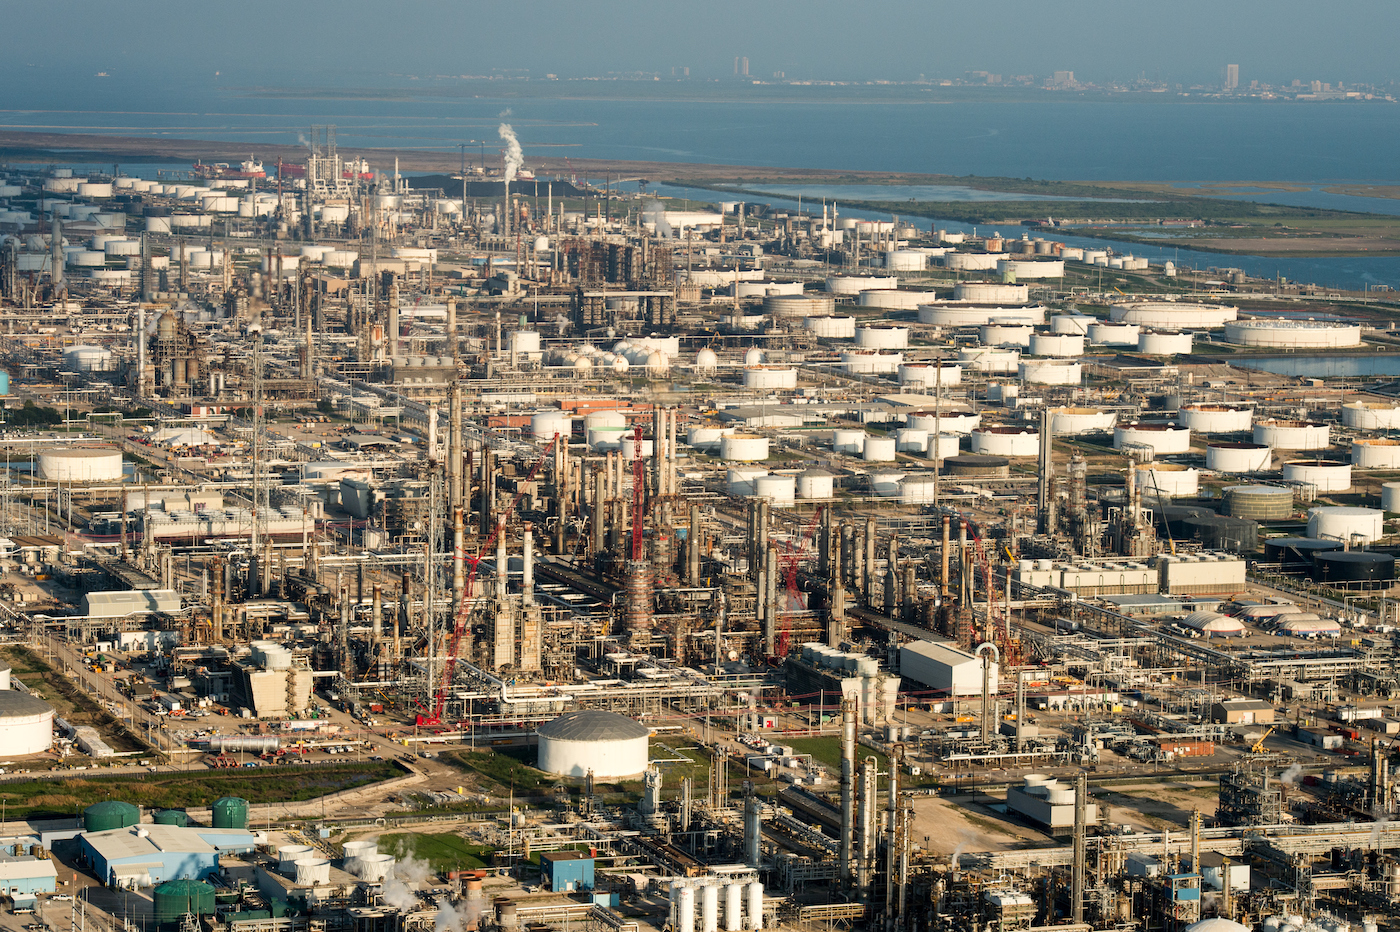 Aerial view of a jungle of refineries in the Houston Ship Channel